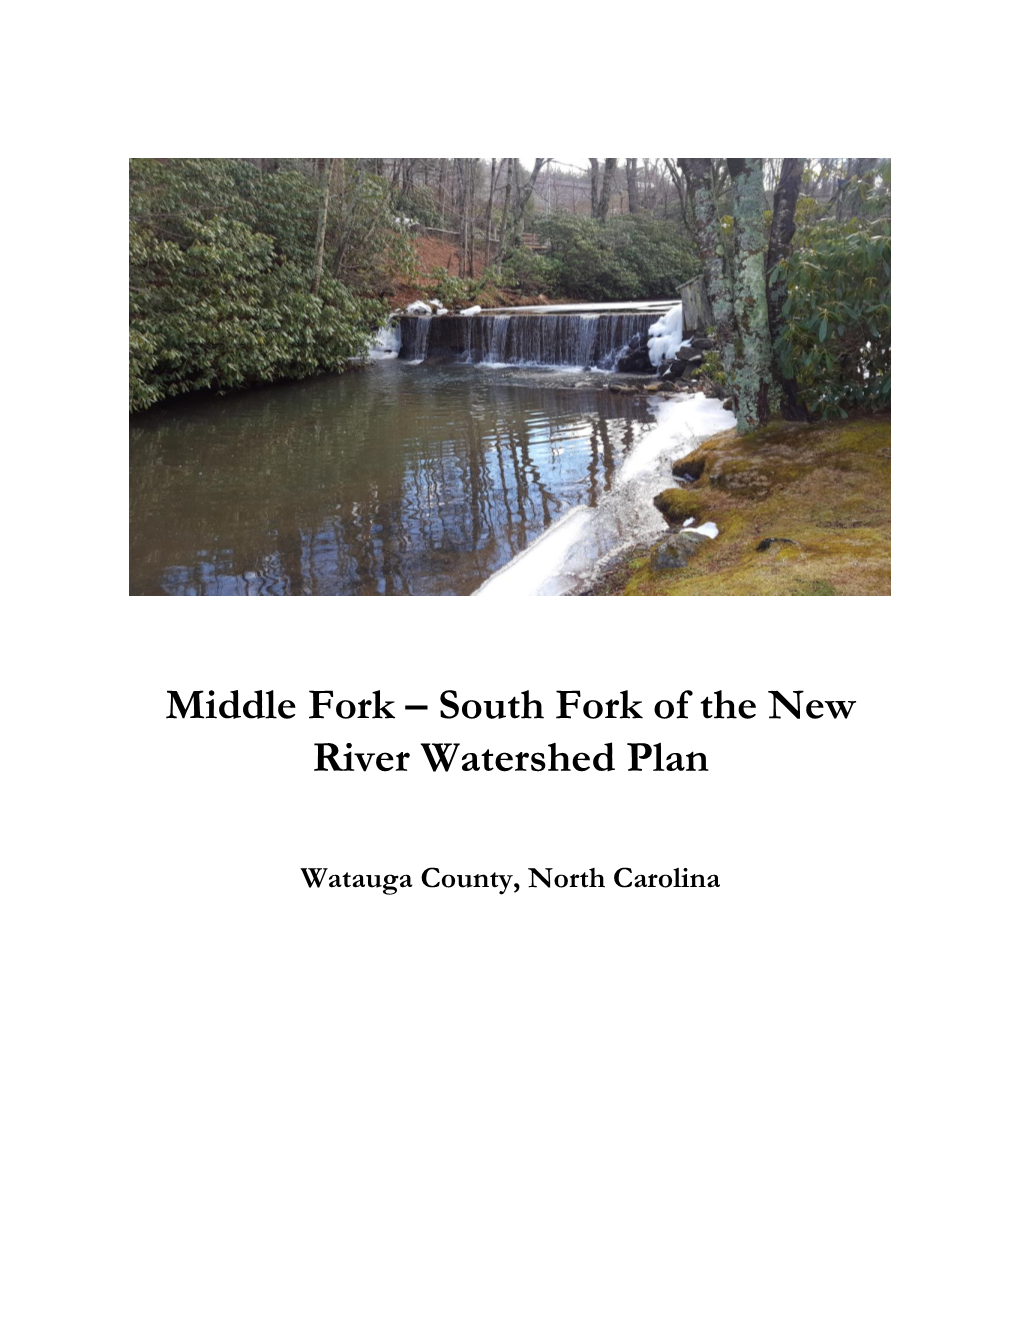 Middle Fork – South Fork of the New River Watershed Plan